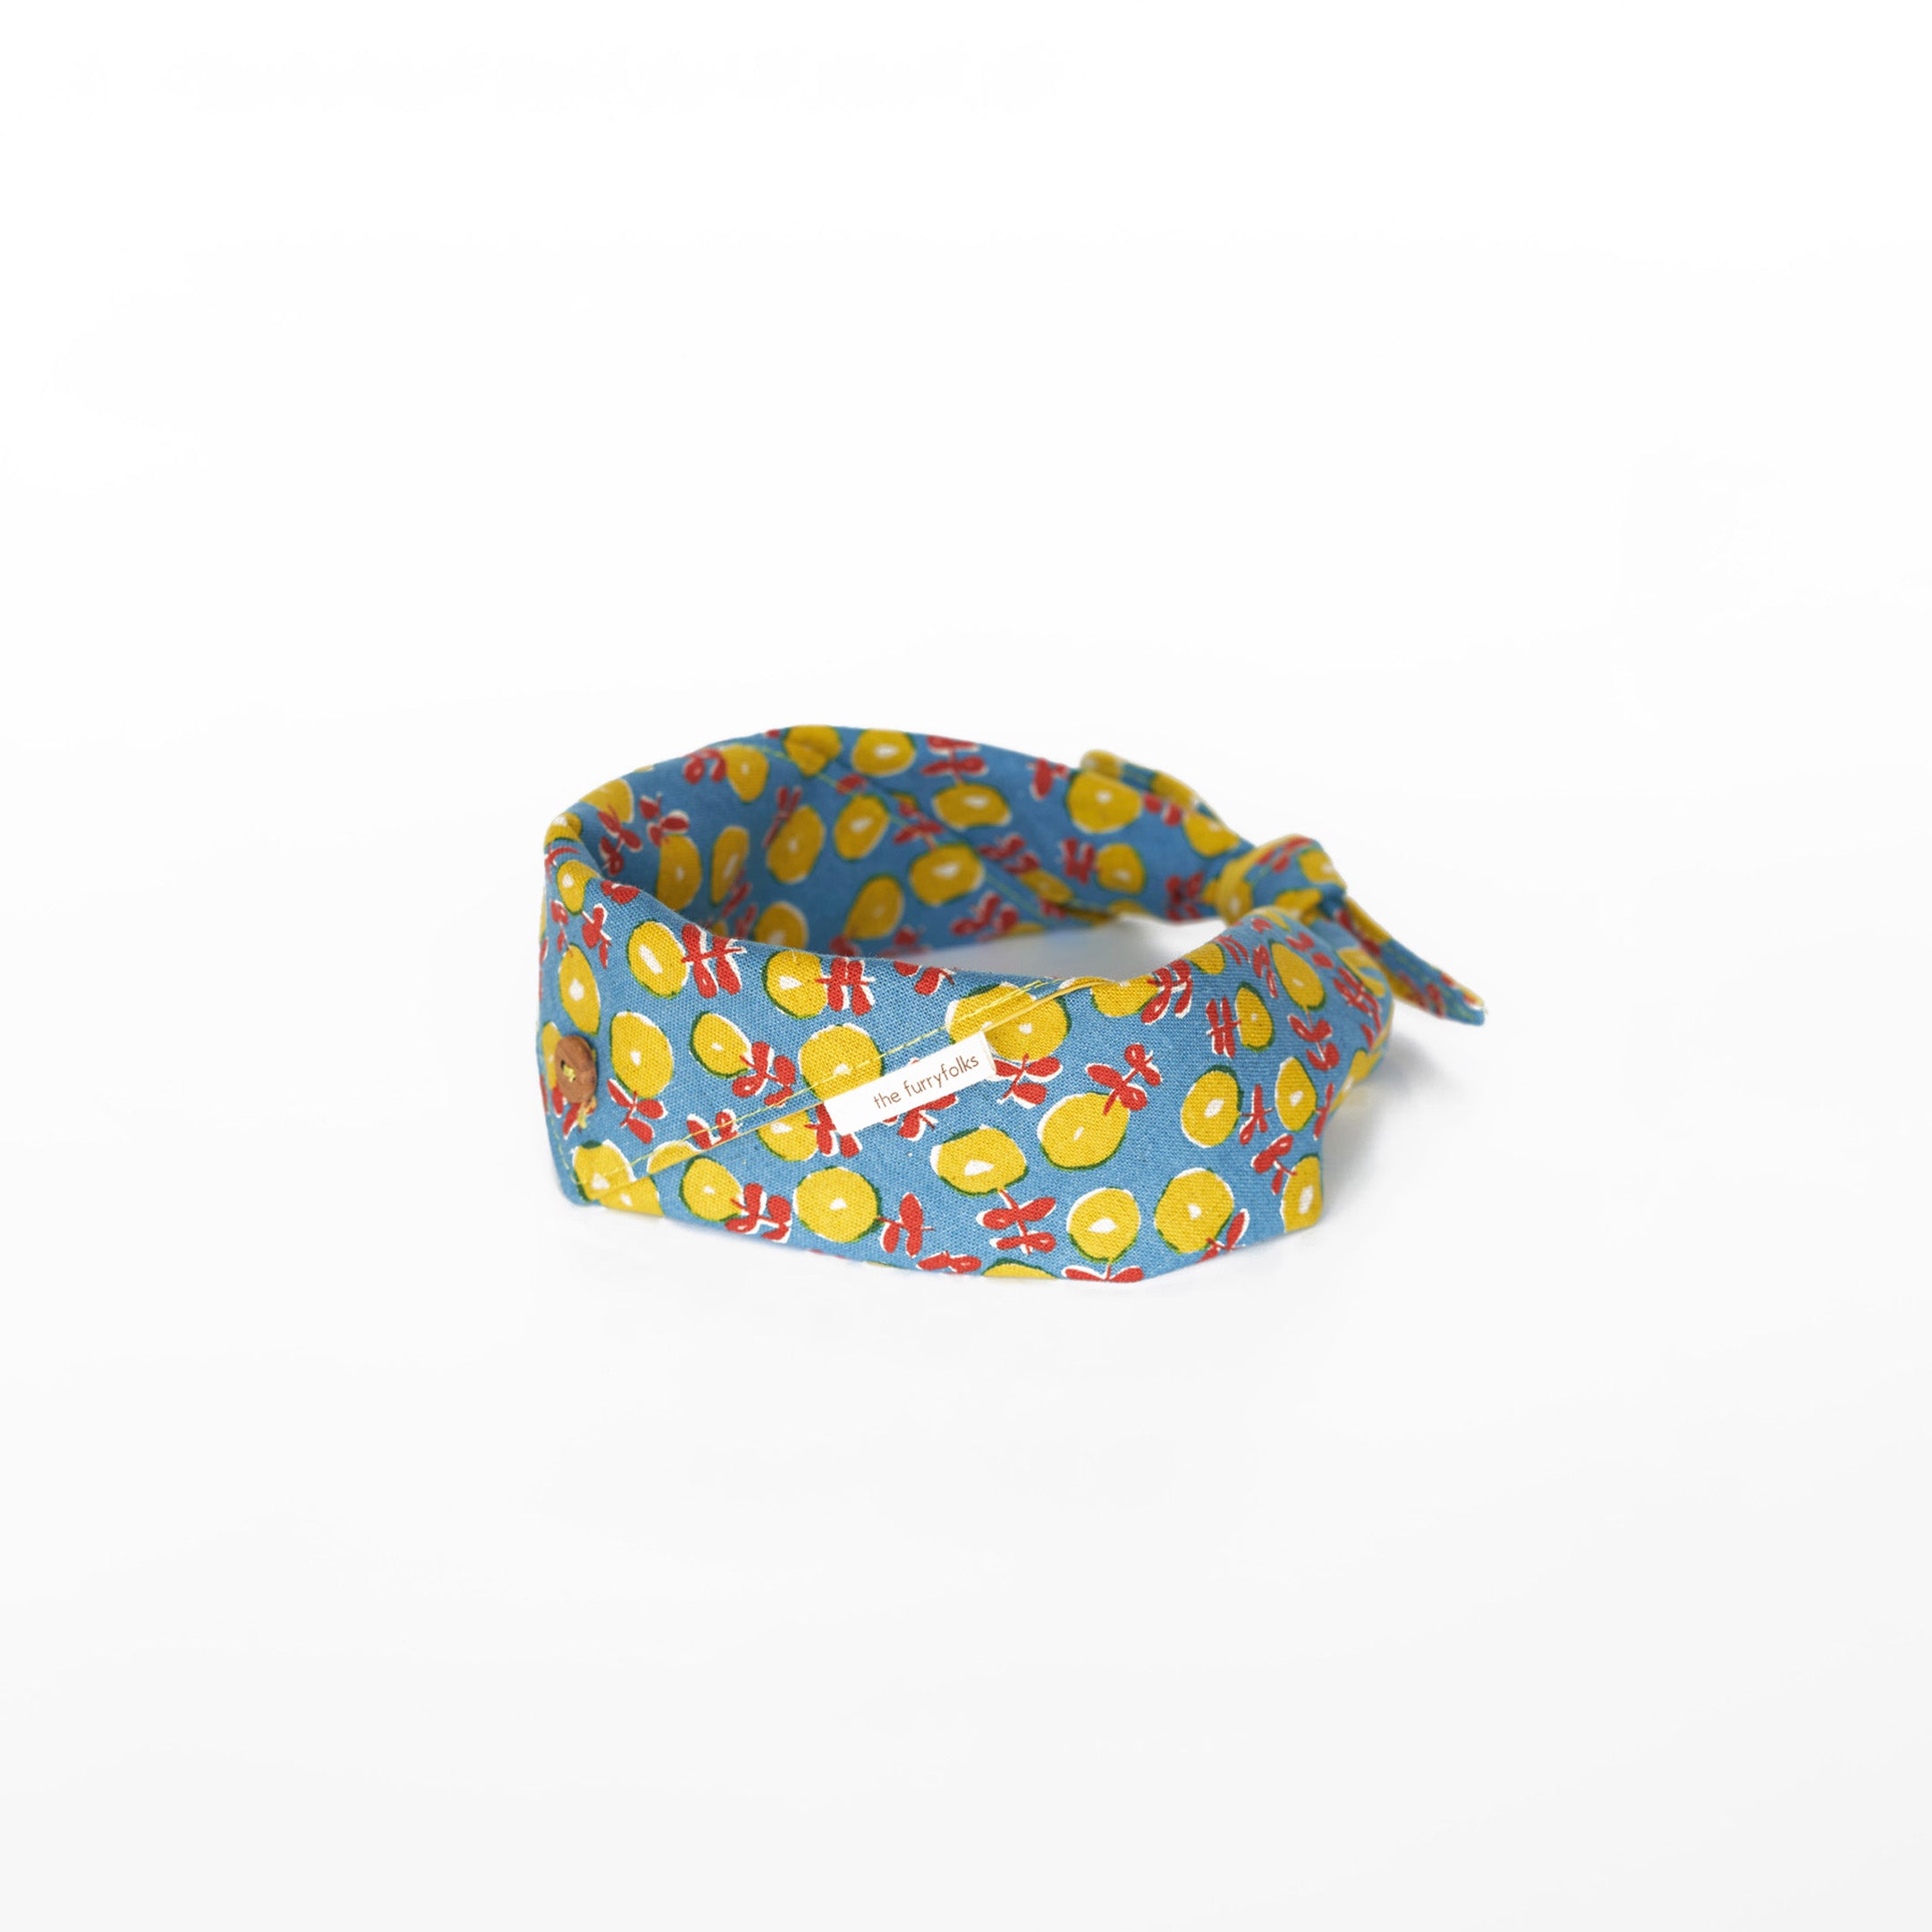 Colorful dog bandana with a playful flower pattern by The Furryfolks.